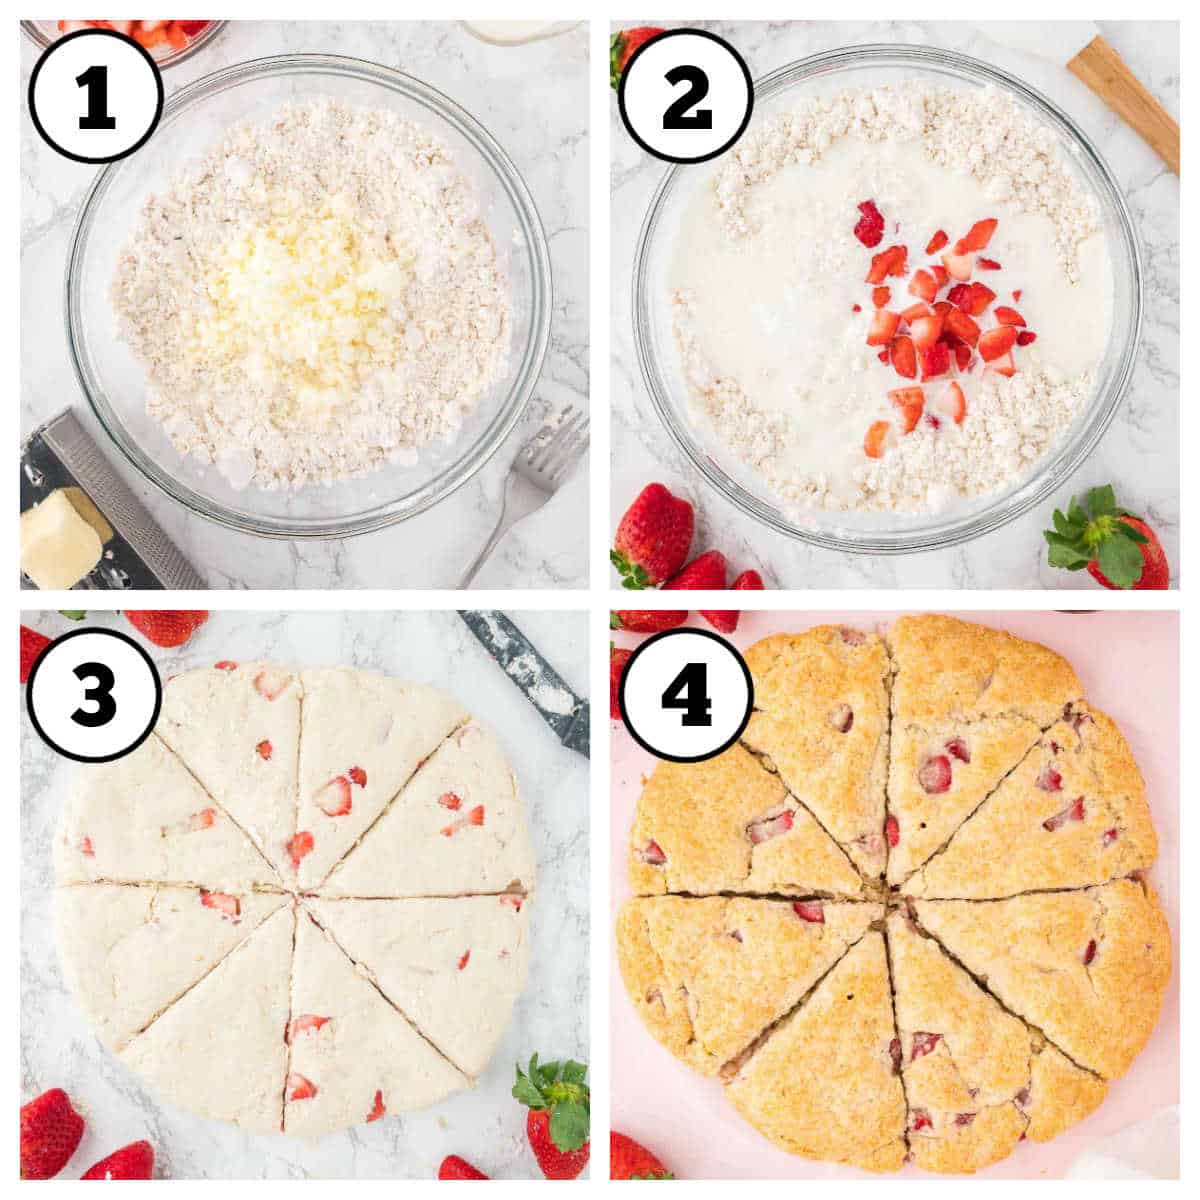 Collage showing steps 1-4 of how to make Bisquick strawberry scones.